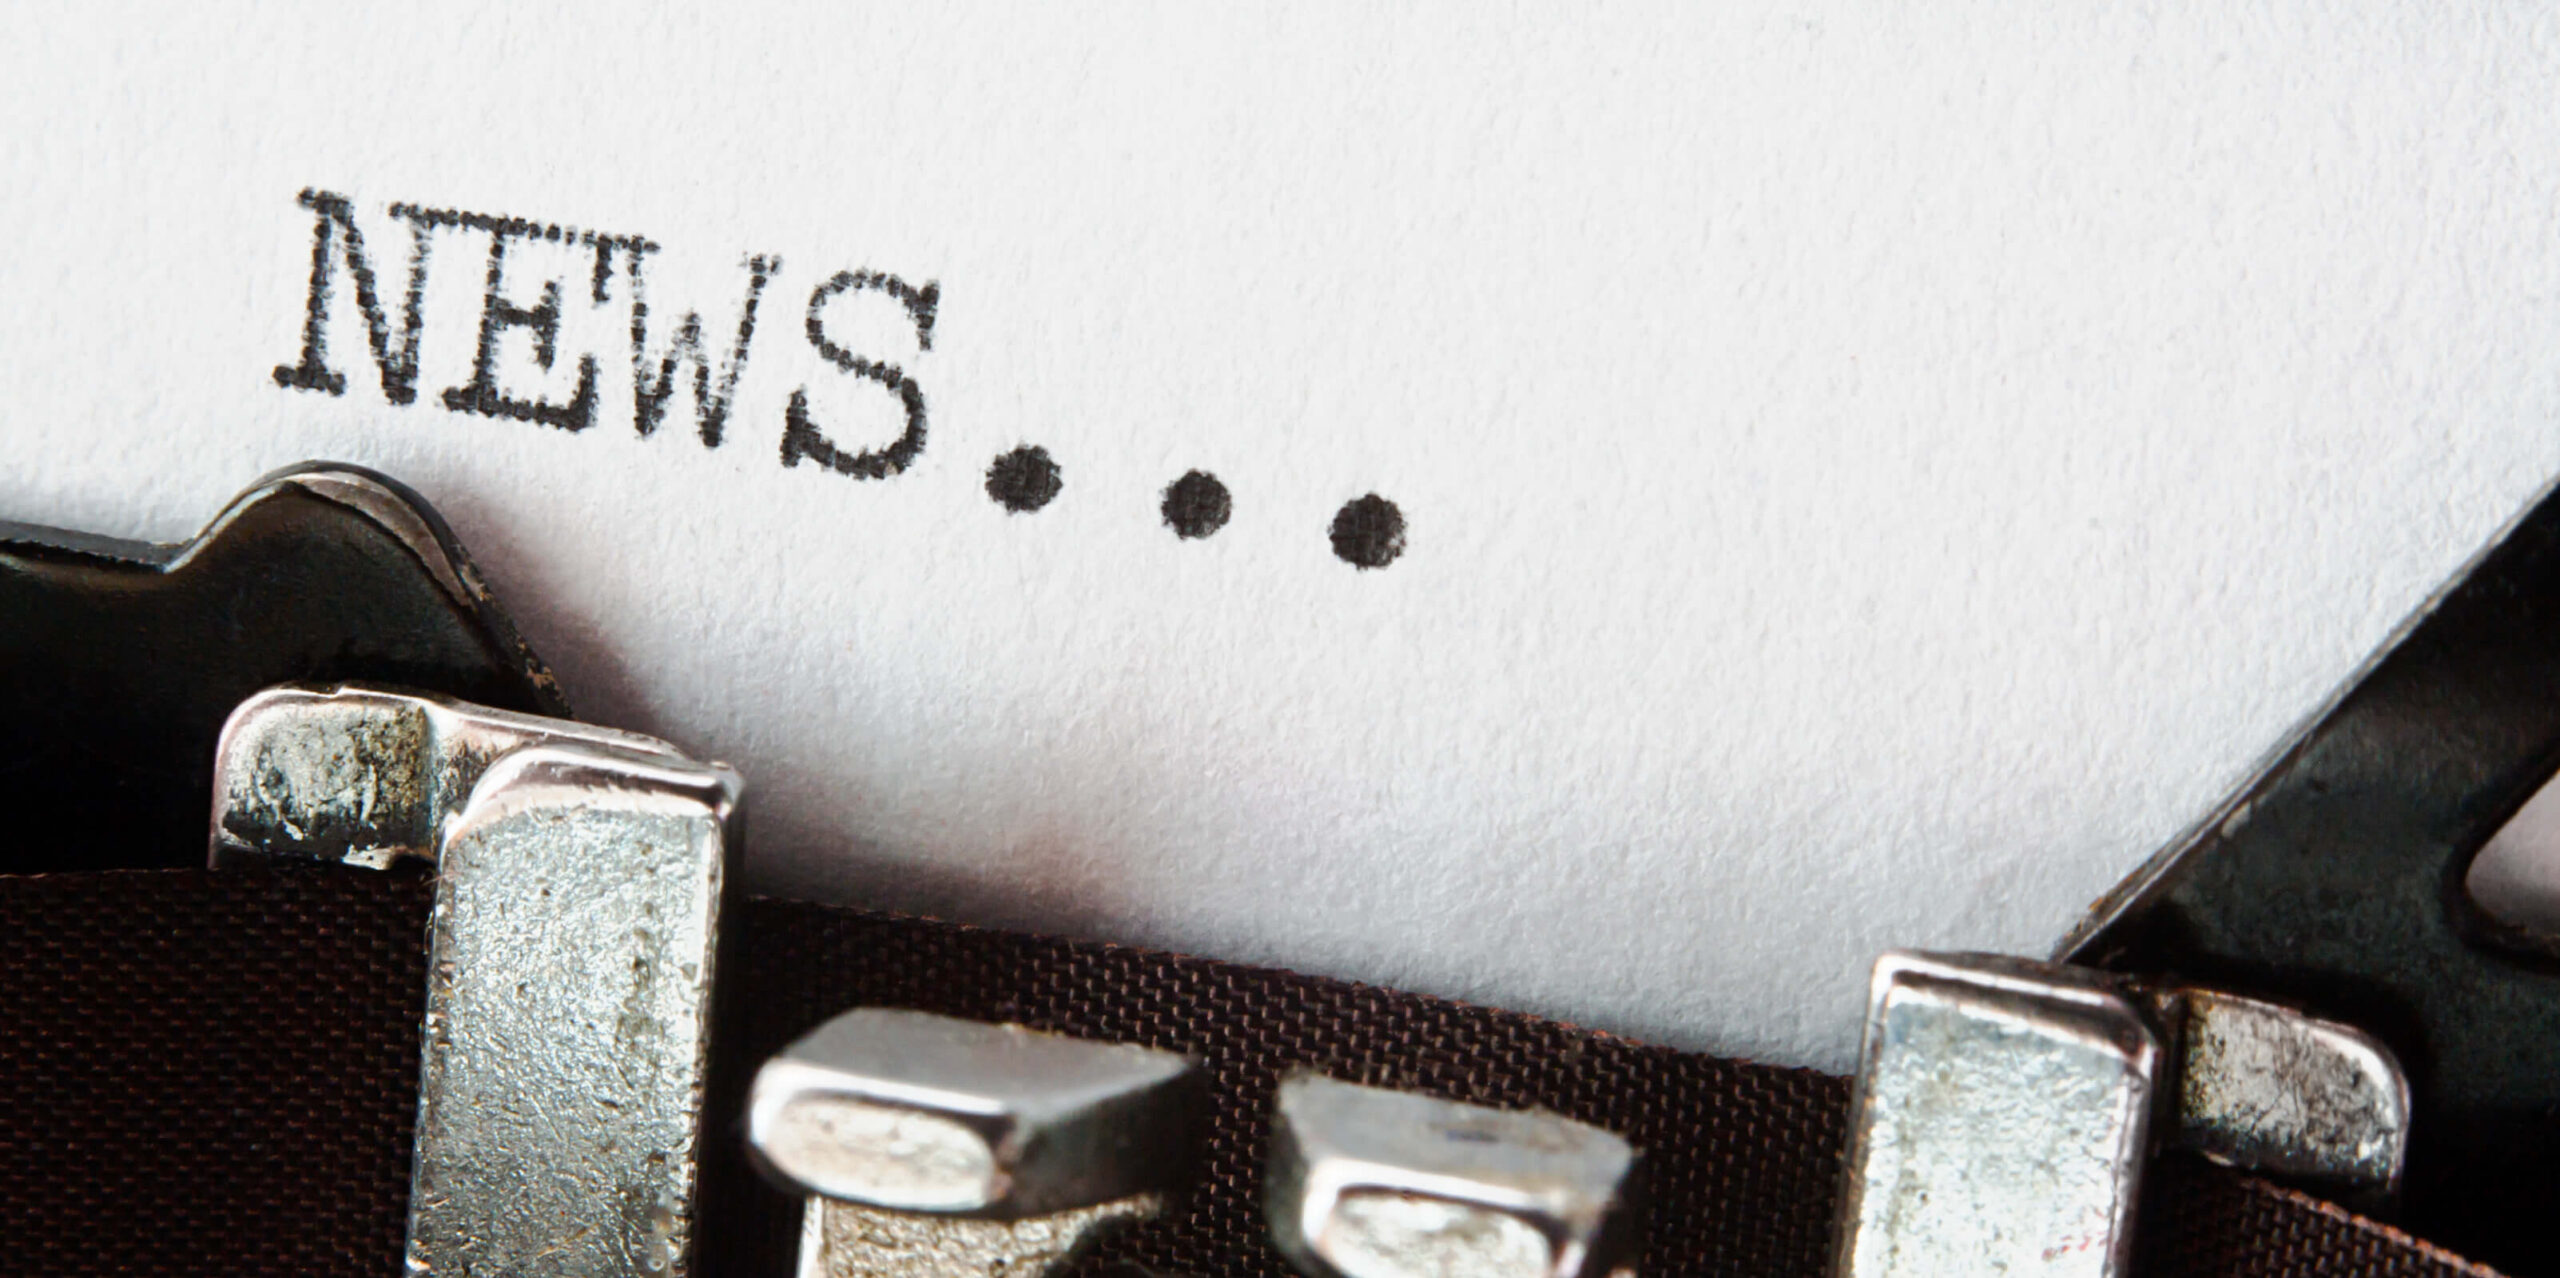 Press Release Quotes Don’t Have To Be Bad: A PR View